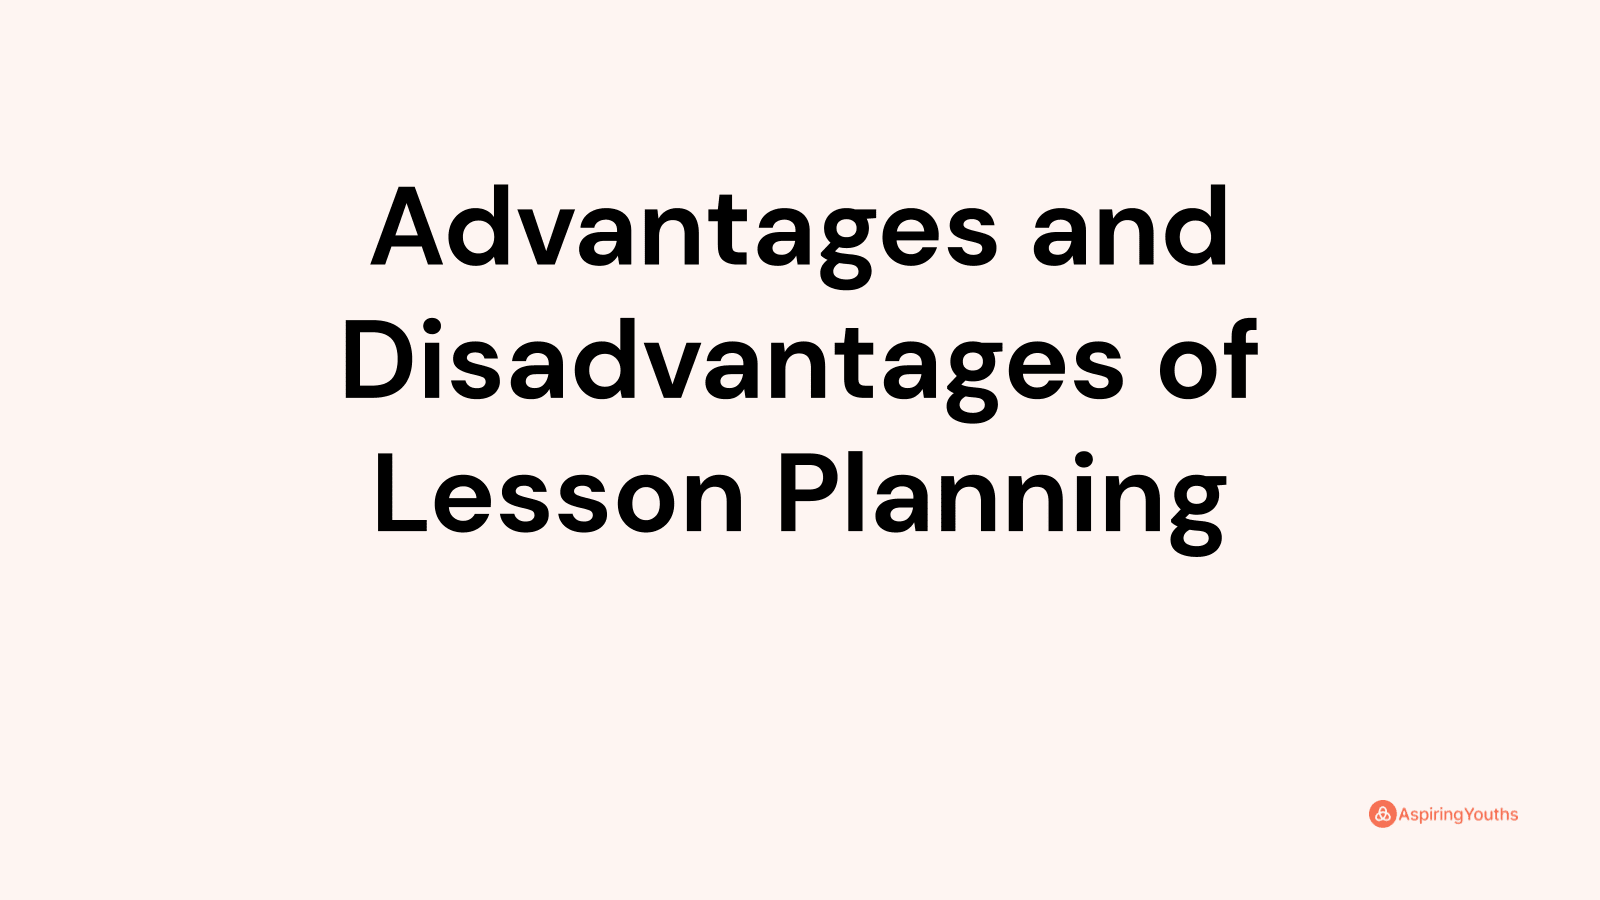 Advantages and disadvantages of Lesson Planning